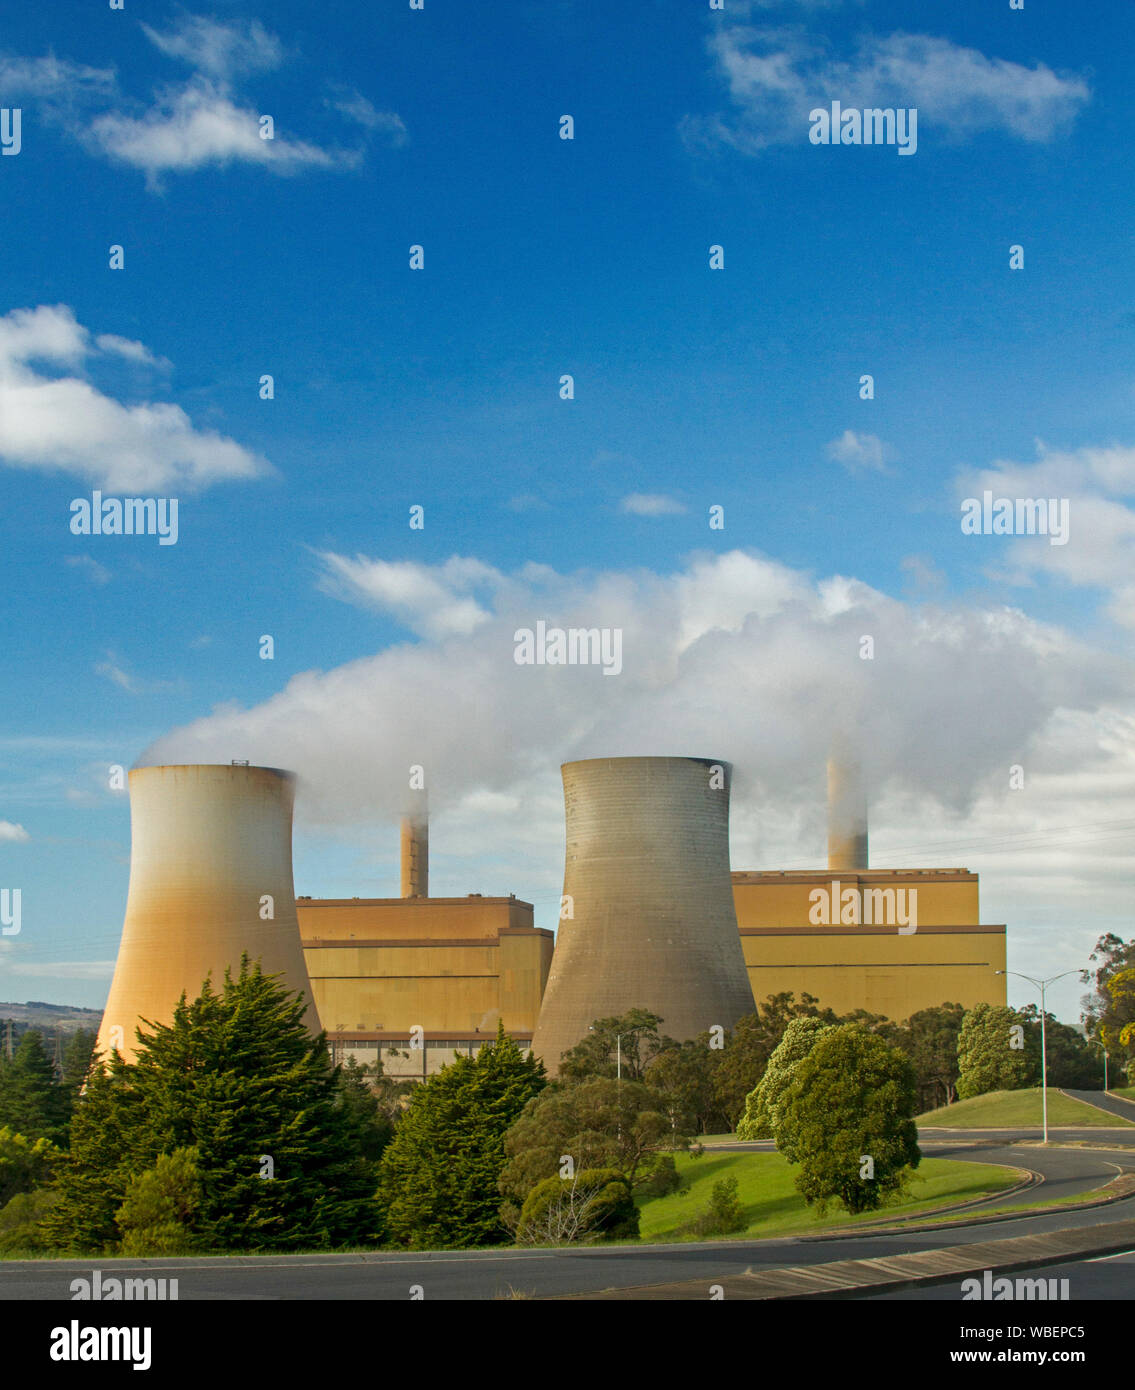 Yallourn North coal fired power station with smoke from tall towers rising into blue sky, Victoria Australia Stock Photo